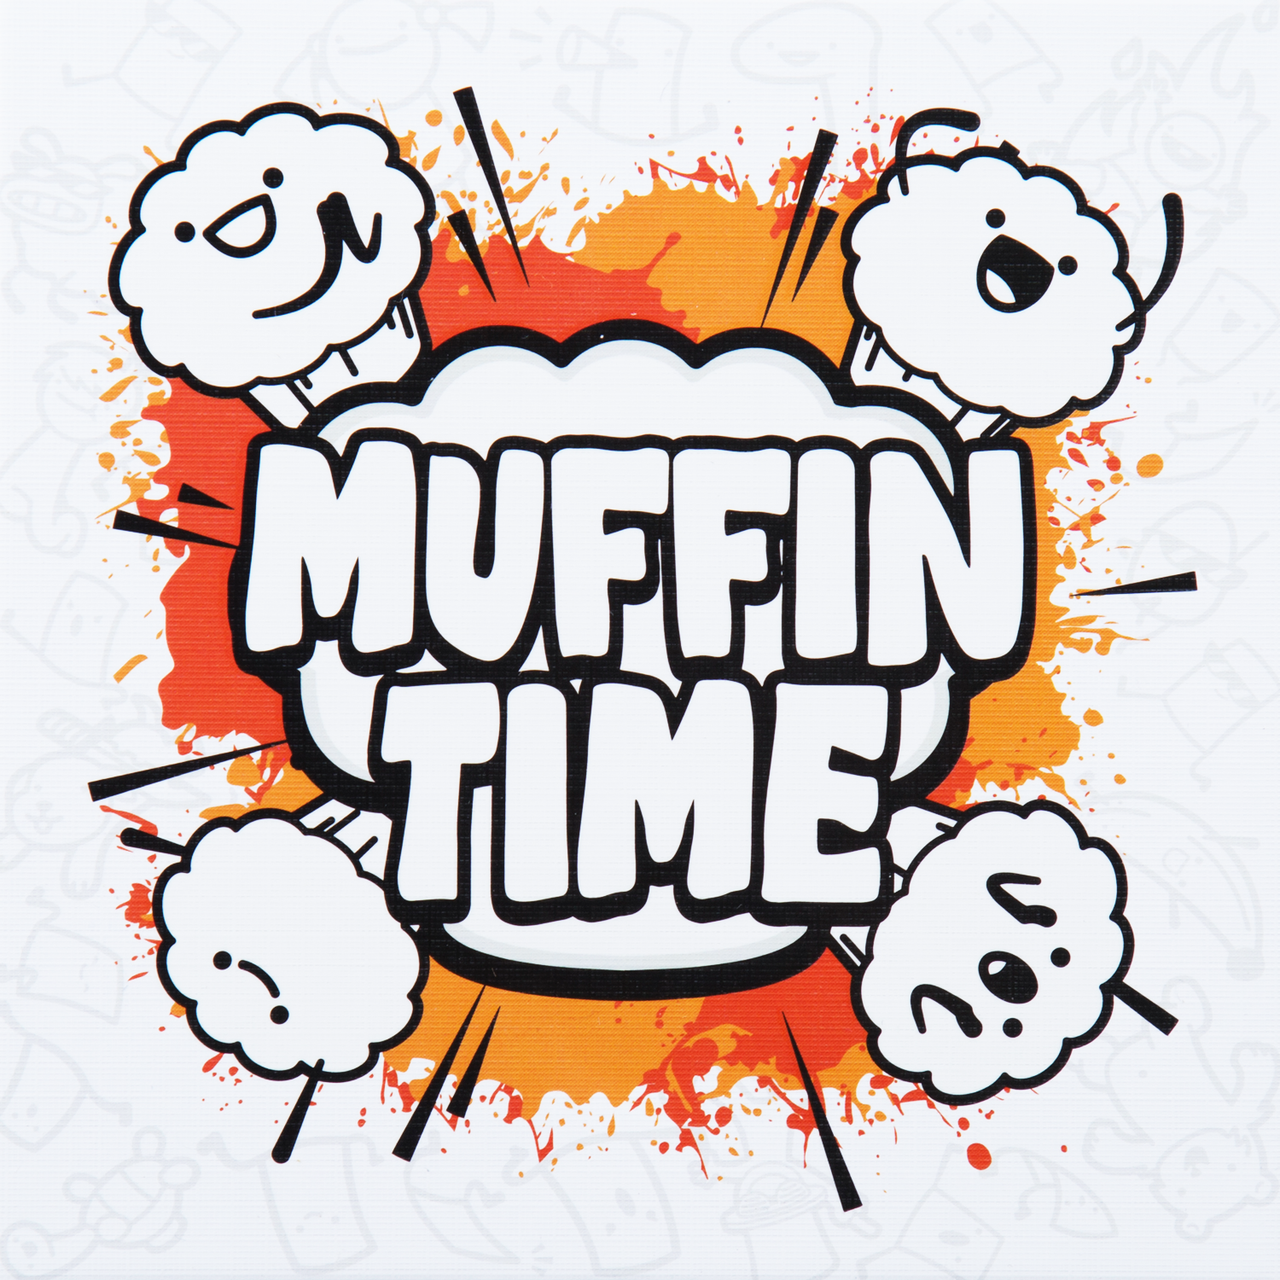 Muffin Time Review - Board Game Review